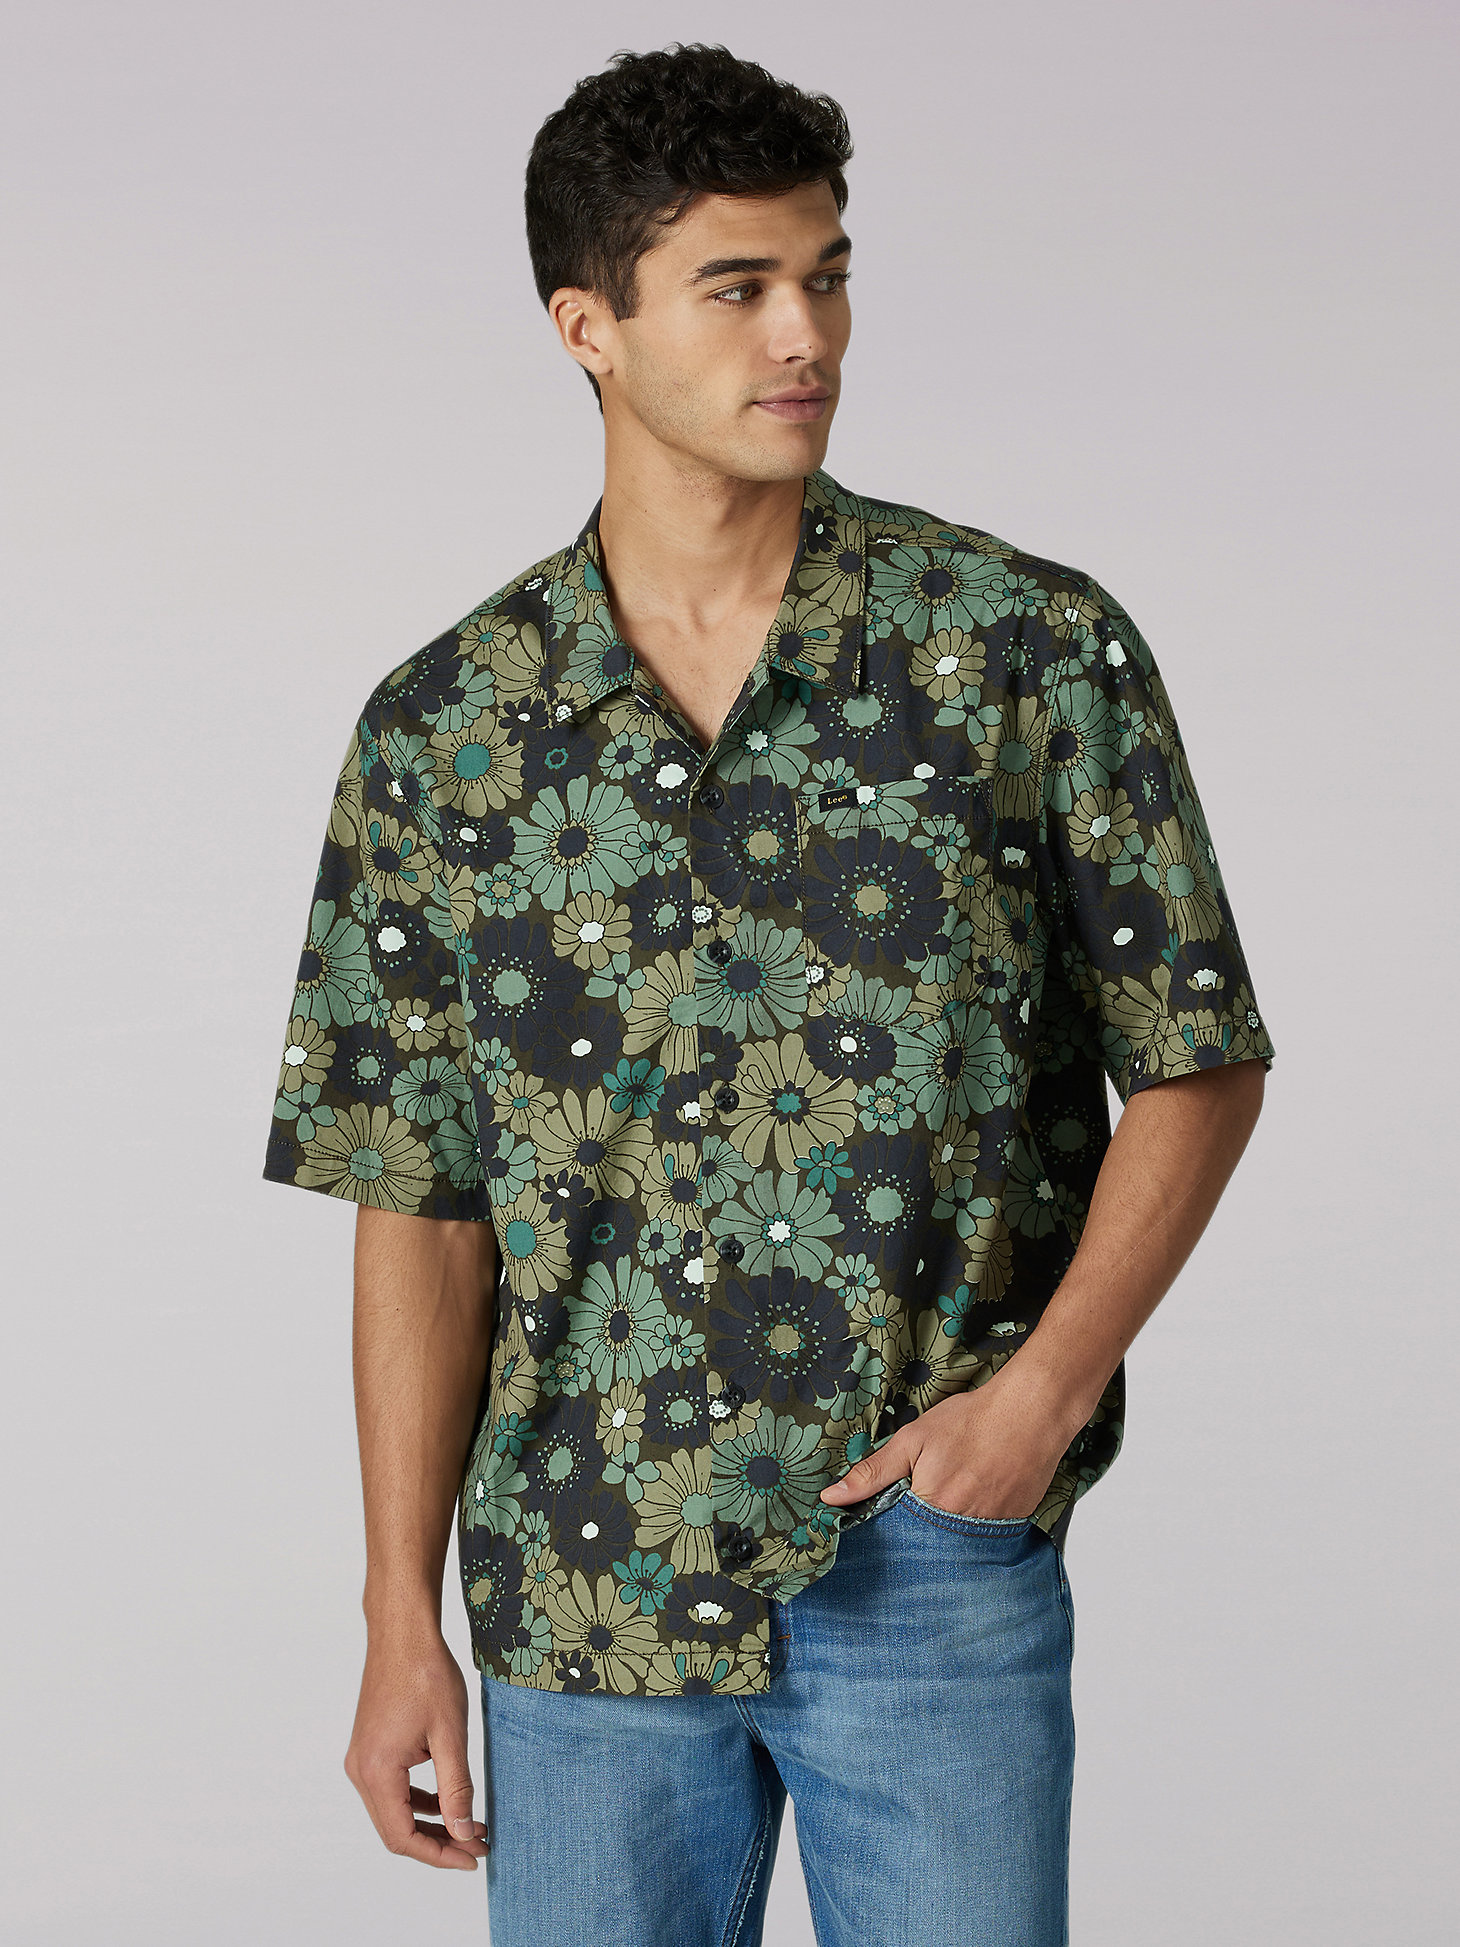 Men's Heritage Working West Button Down Shirt in Green Floral main view